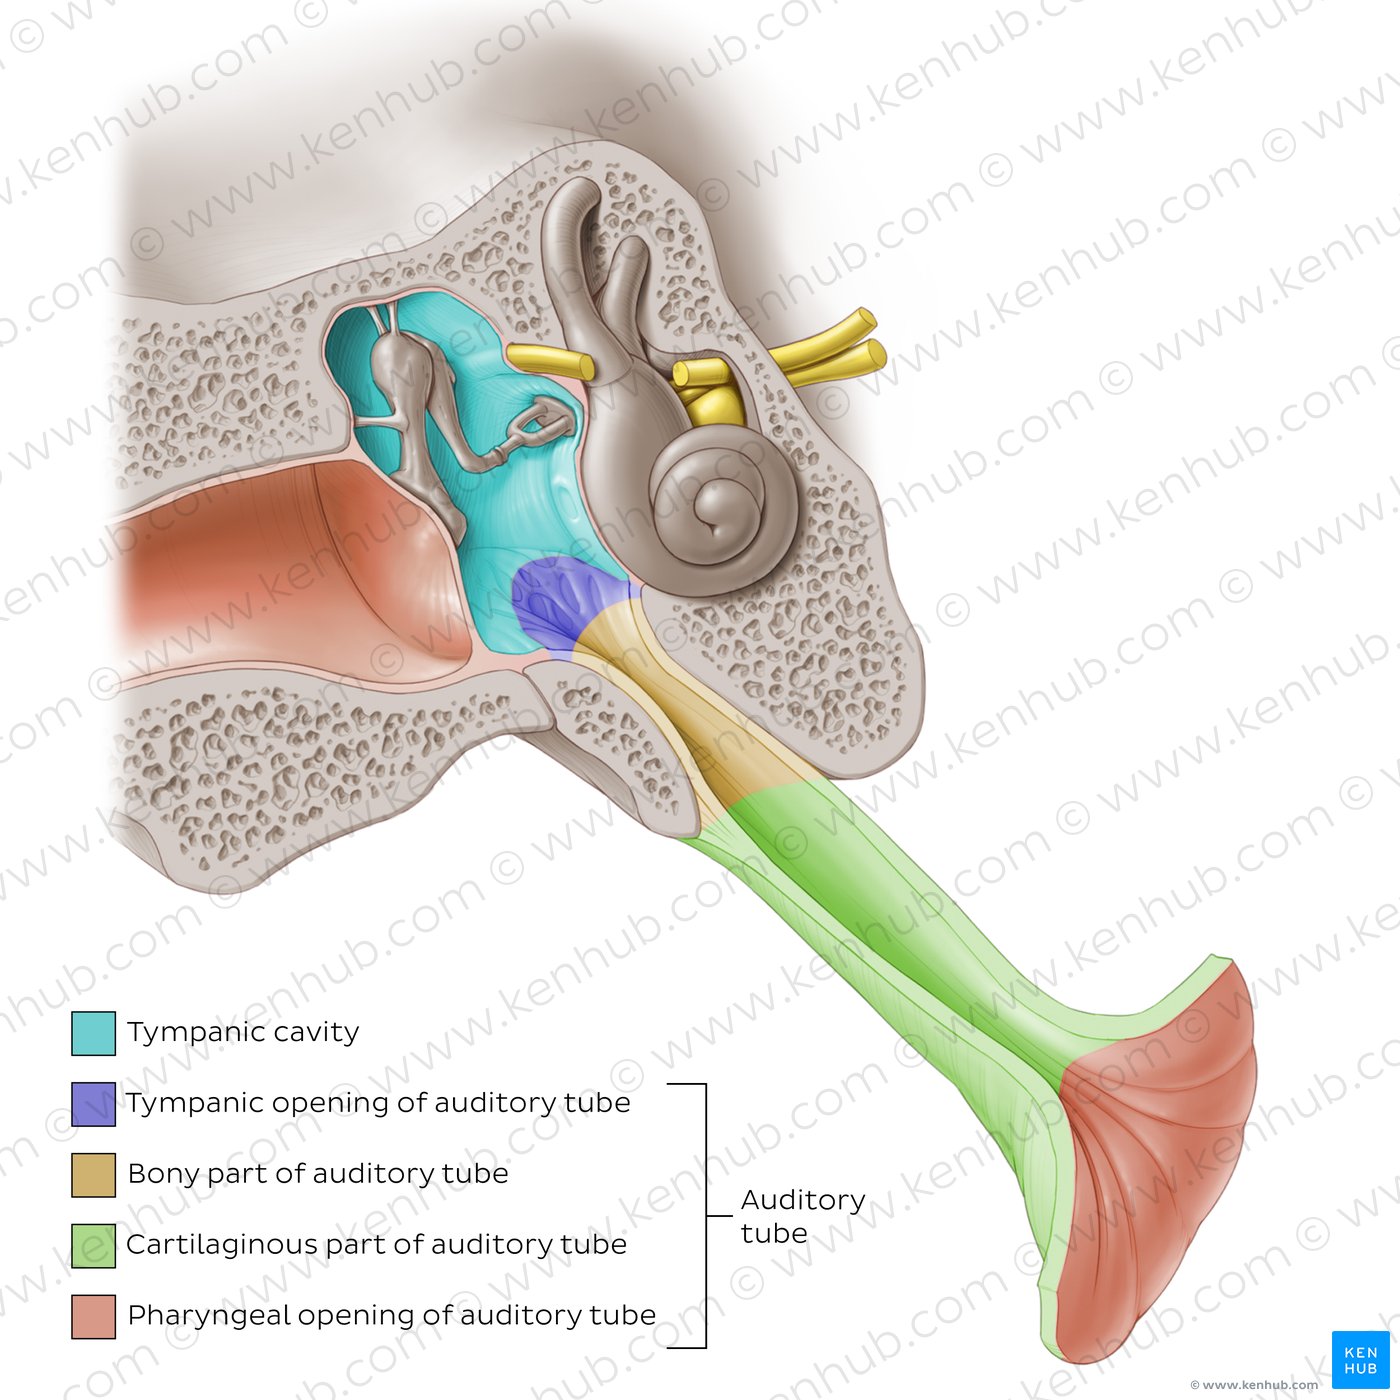 Parts of the auditory tube